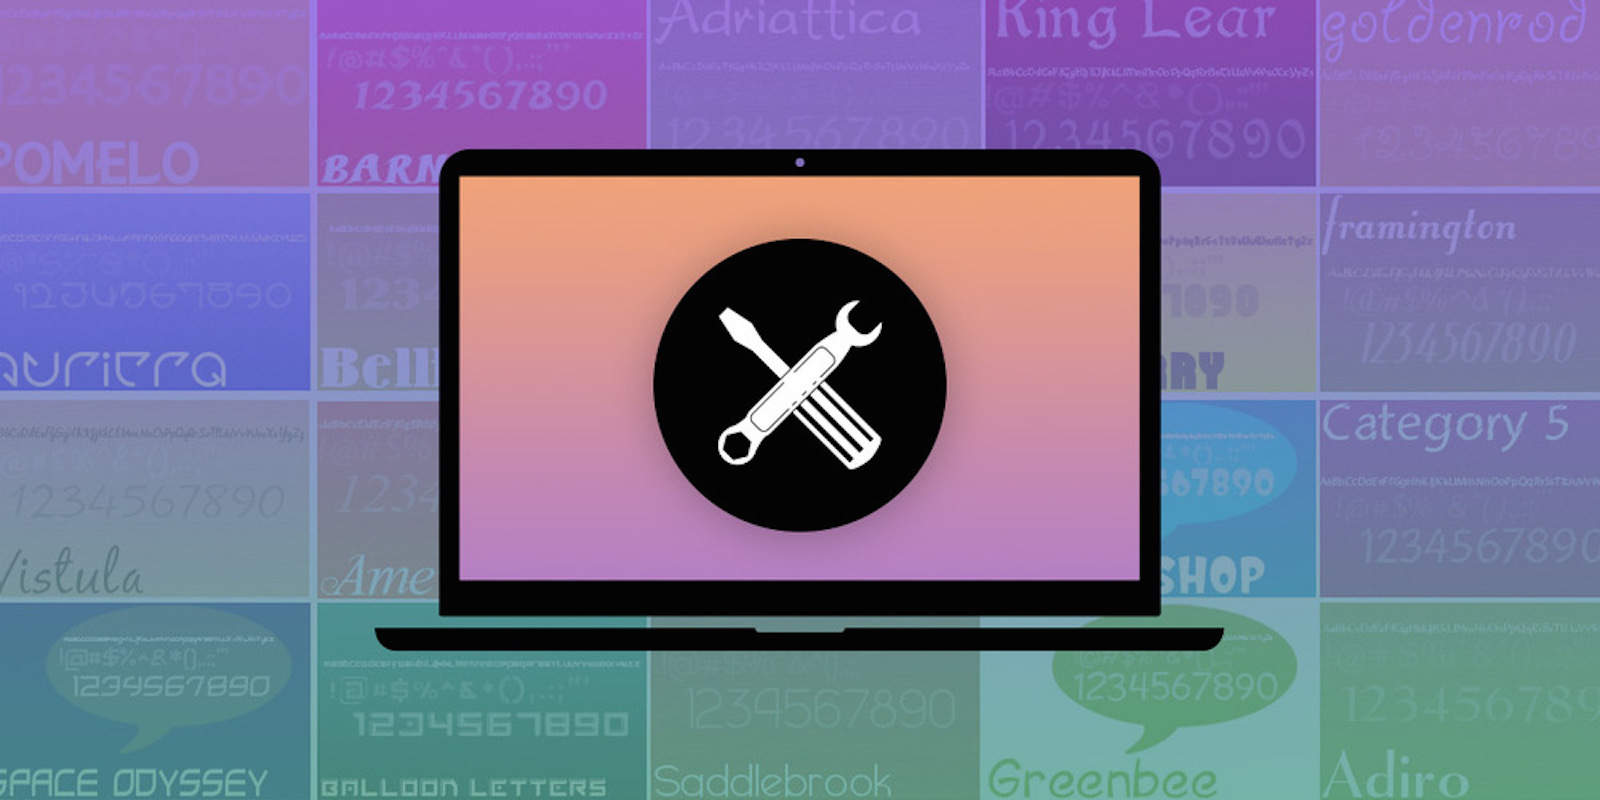 Tune up your mac and add a massive library of design assets all at once.